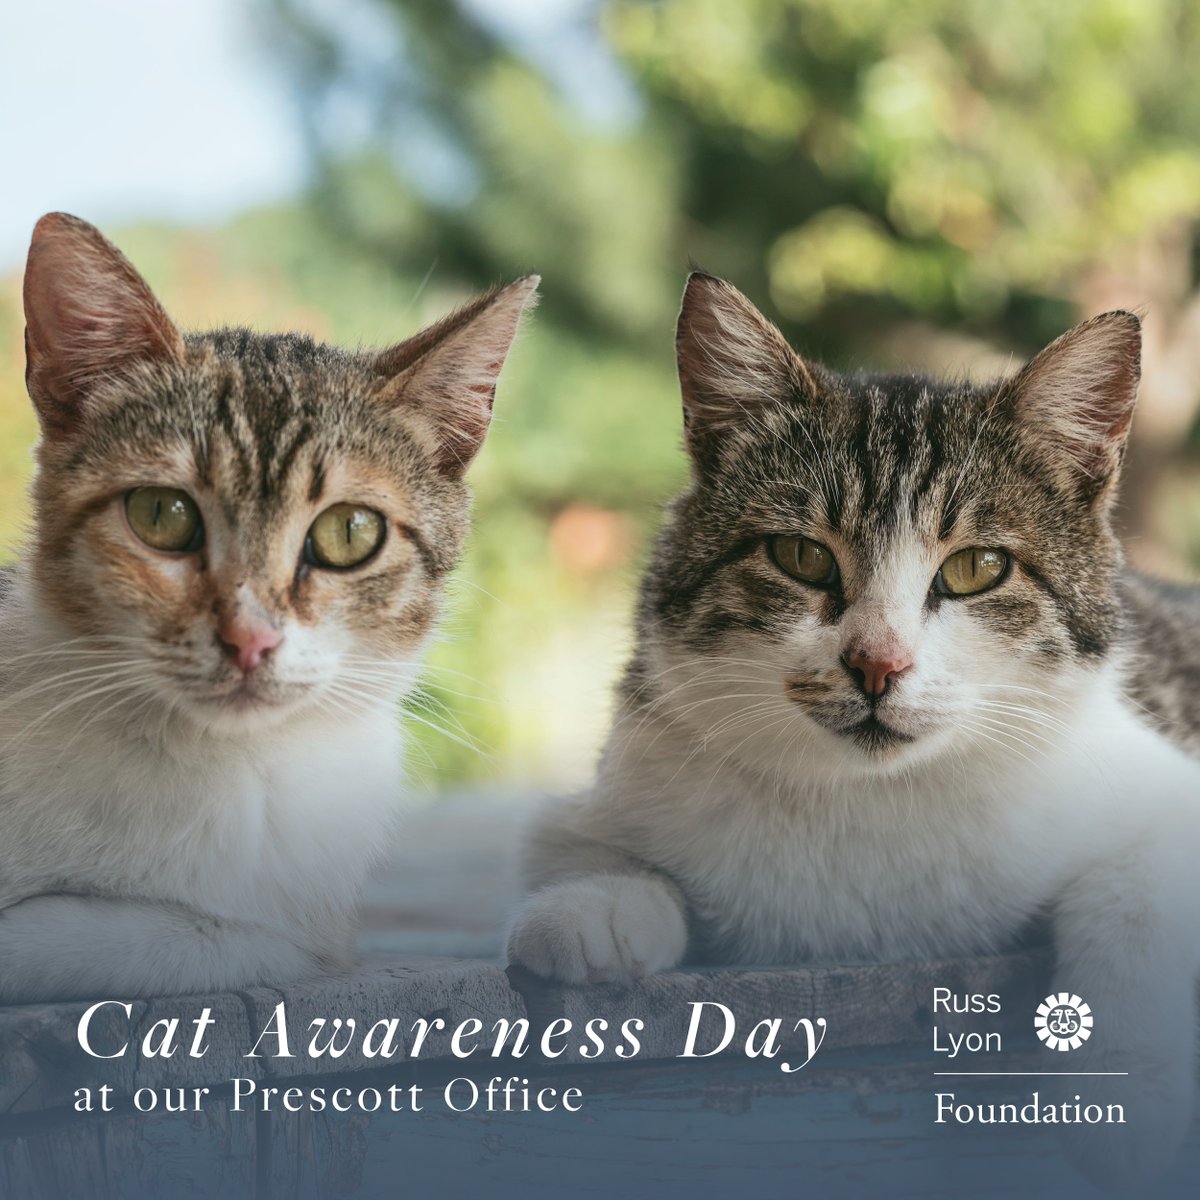 Our Russ Lyon Sotheby's International Realty Prescott agents are holding a cat awareness day May 12th from 11 am - 3 pm. 

Learn More about our event: https://t.co/5ZOaNPXB7M https://t.co/krFvRIE3xa